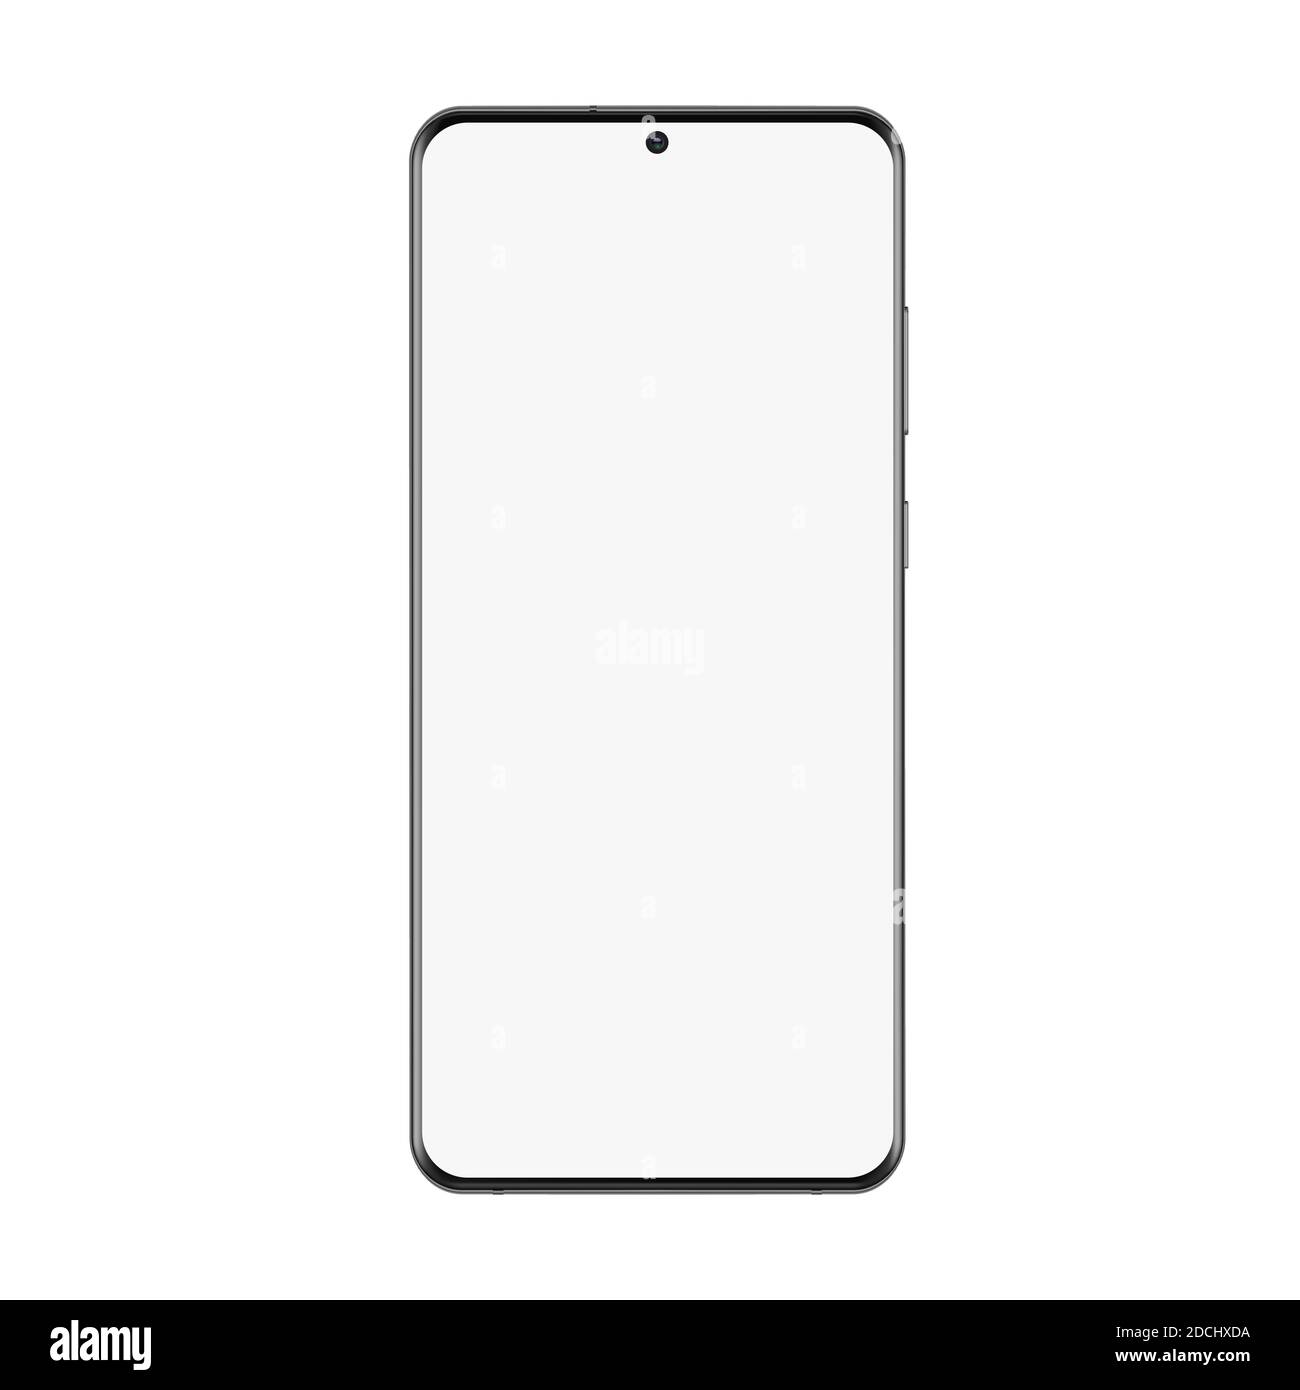 Phone mockup vector illustration. Realistic cellphone with black frame and white blank screen for web app, smartphone for presentation of application and mobile communication isolated on white Stock Vector